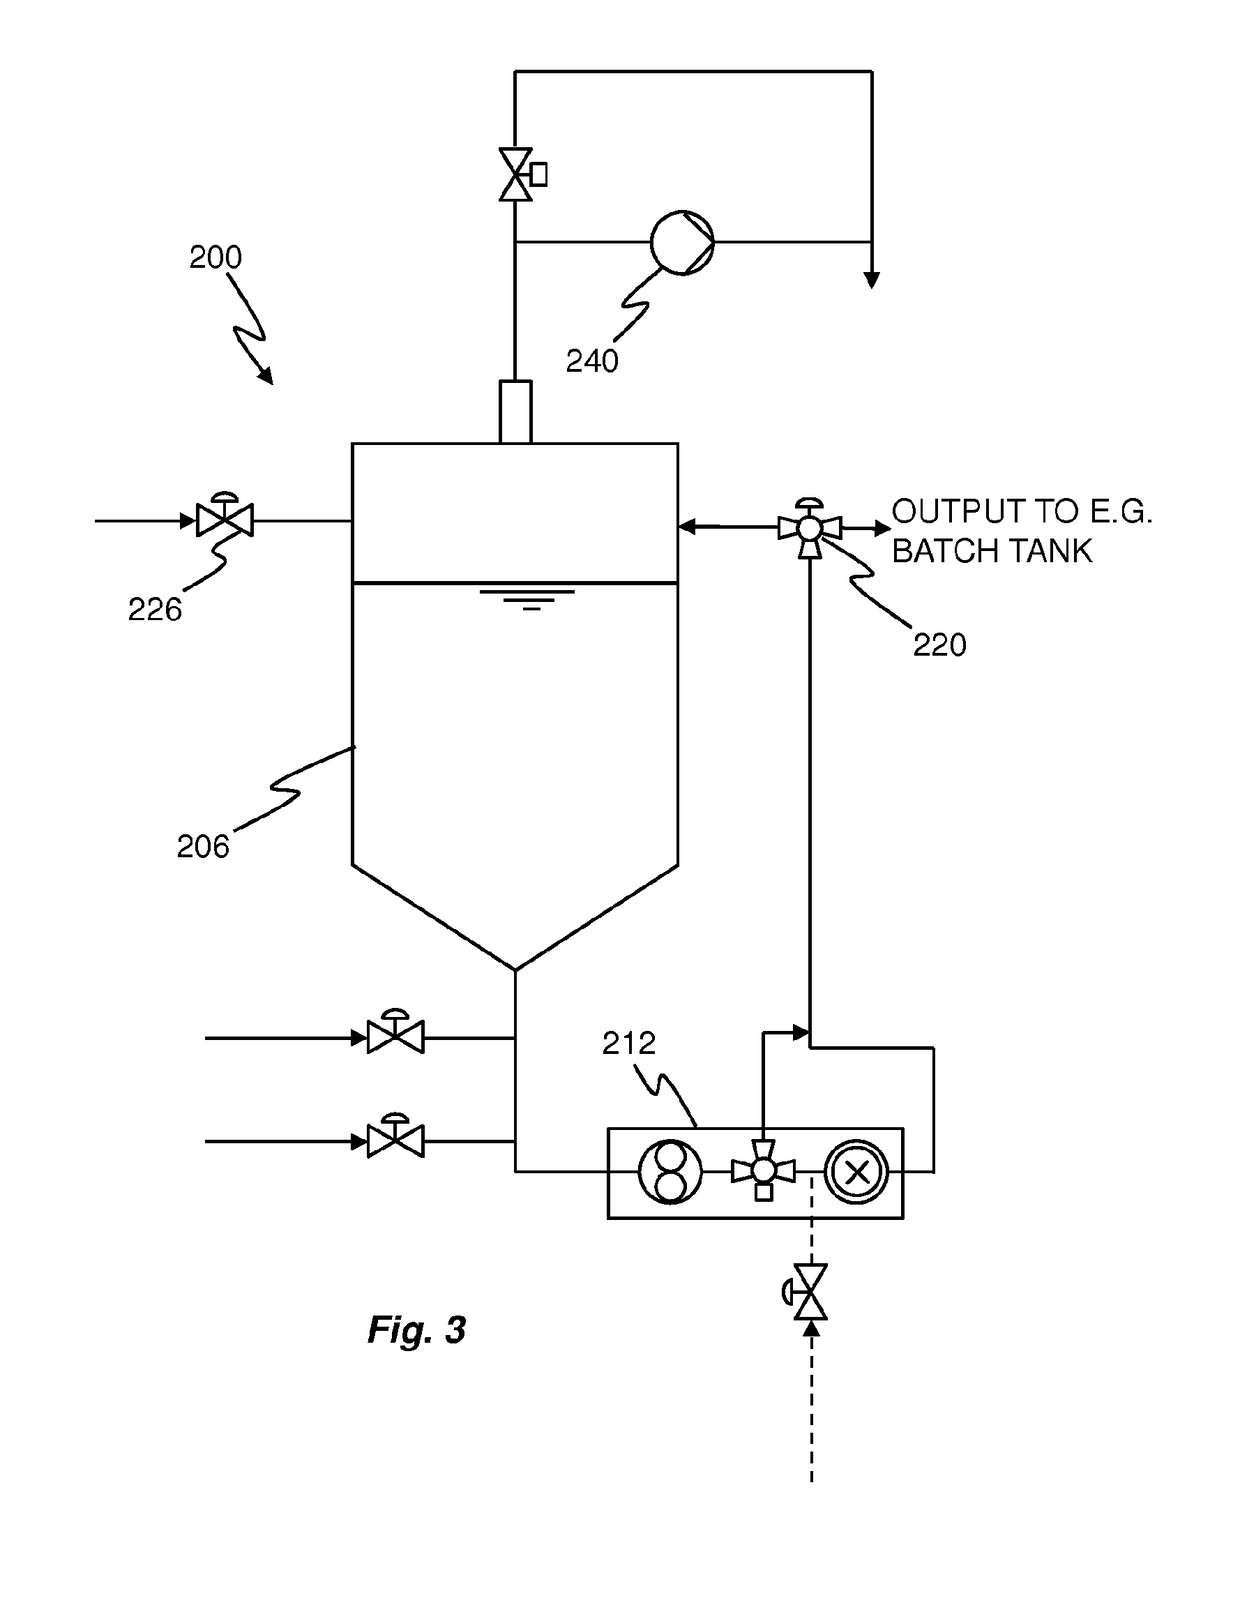 Liquid processing mixer for mixing a liquid with an additive